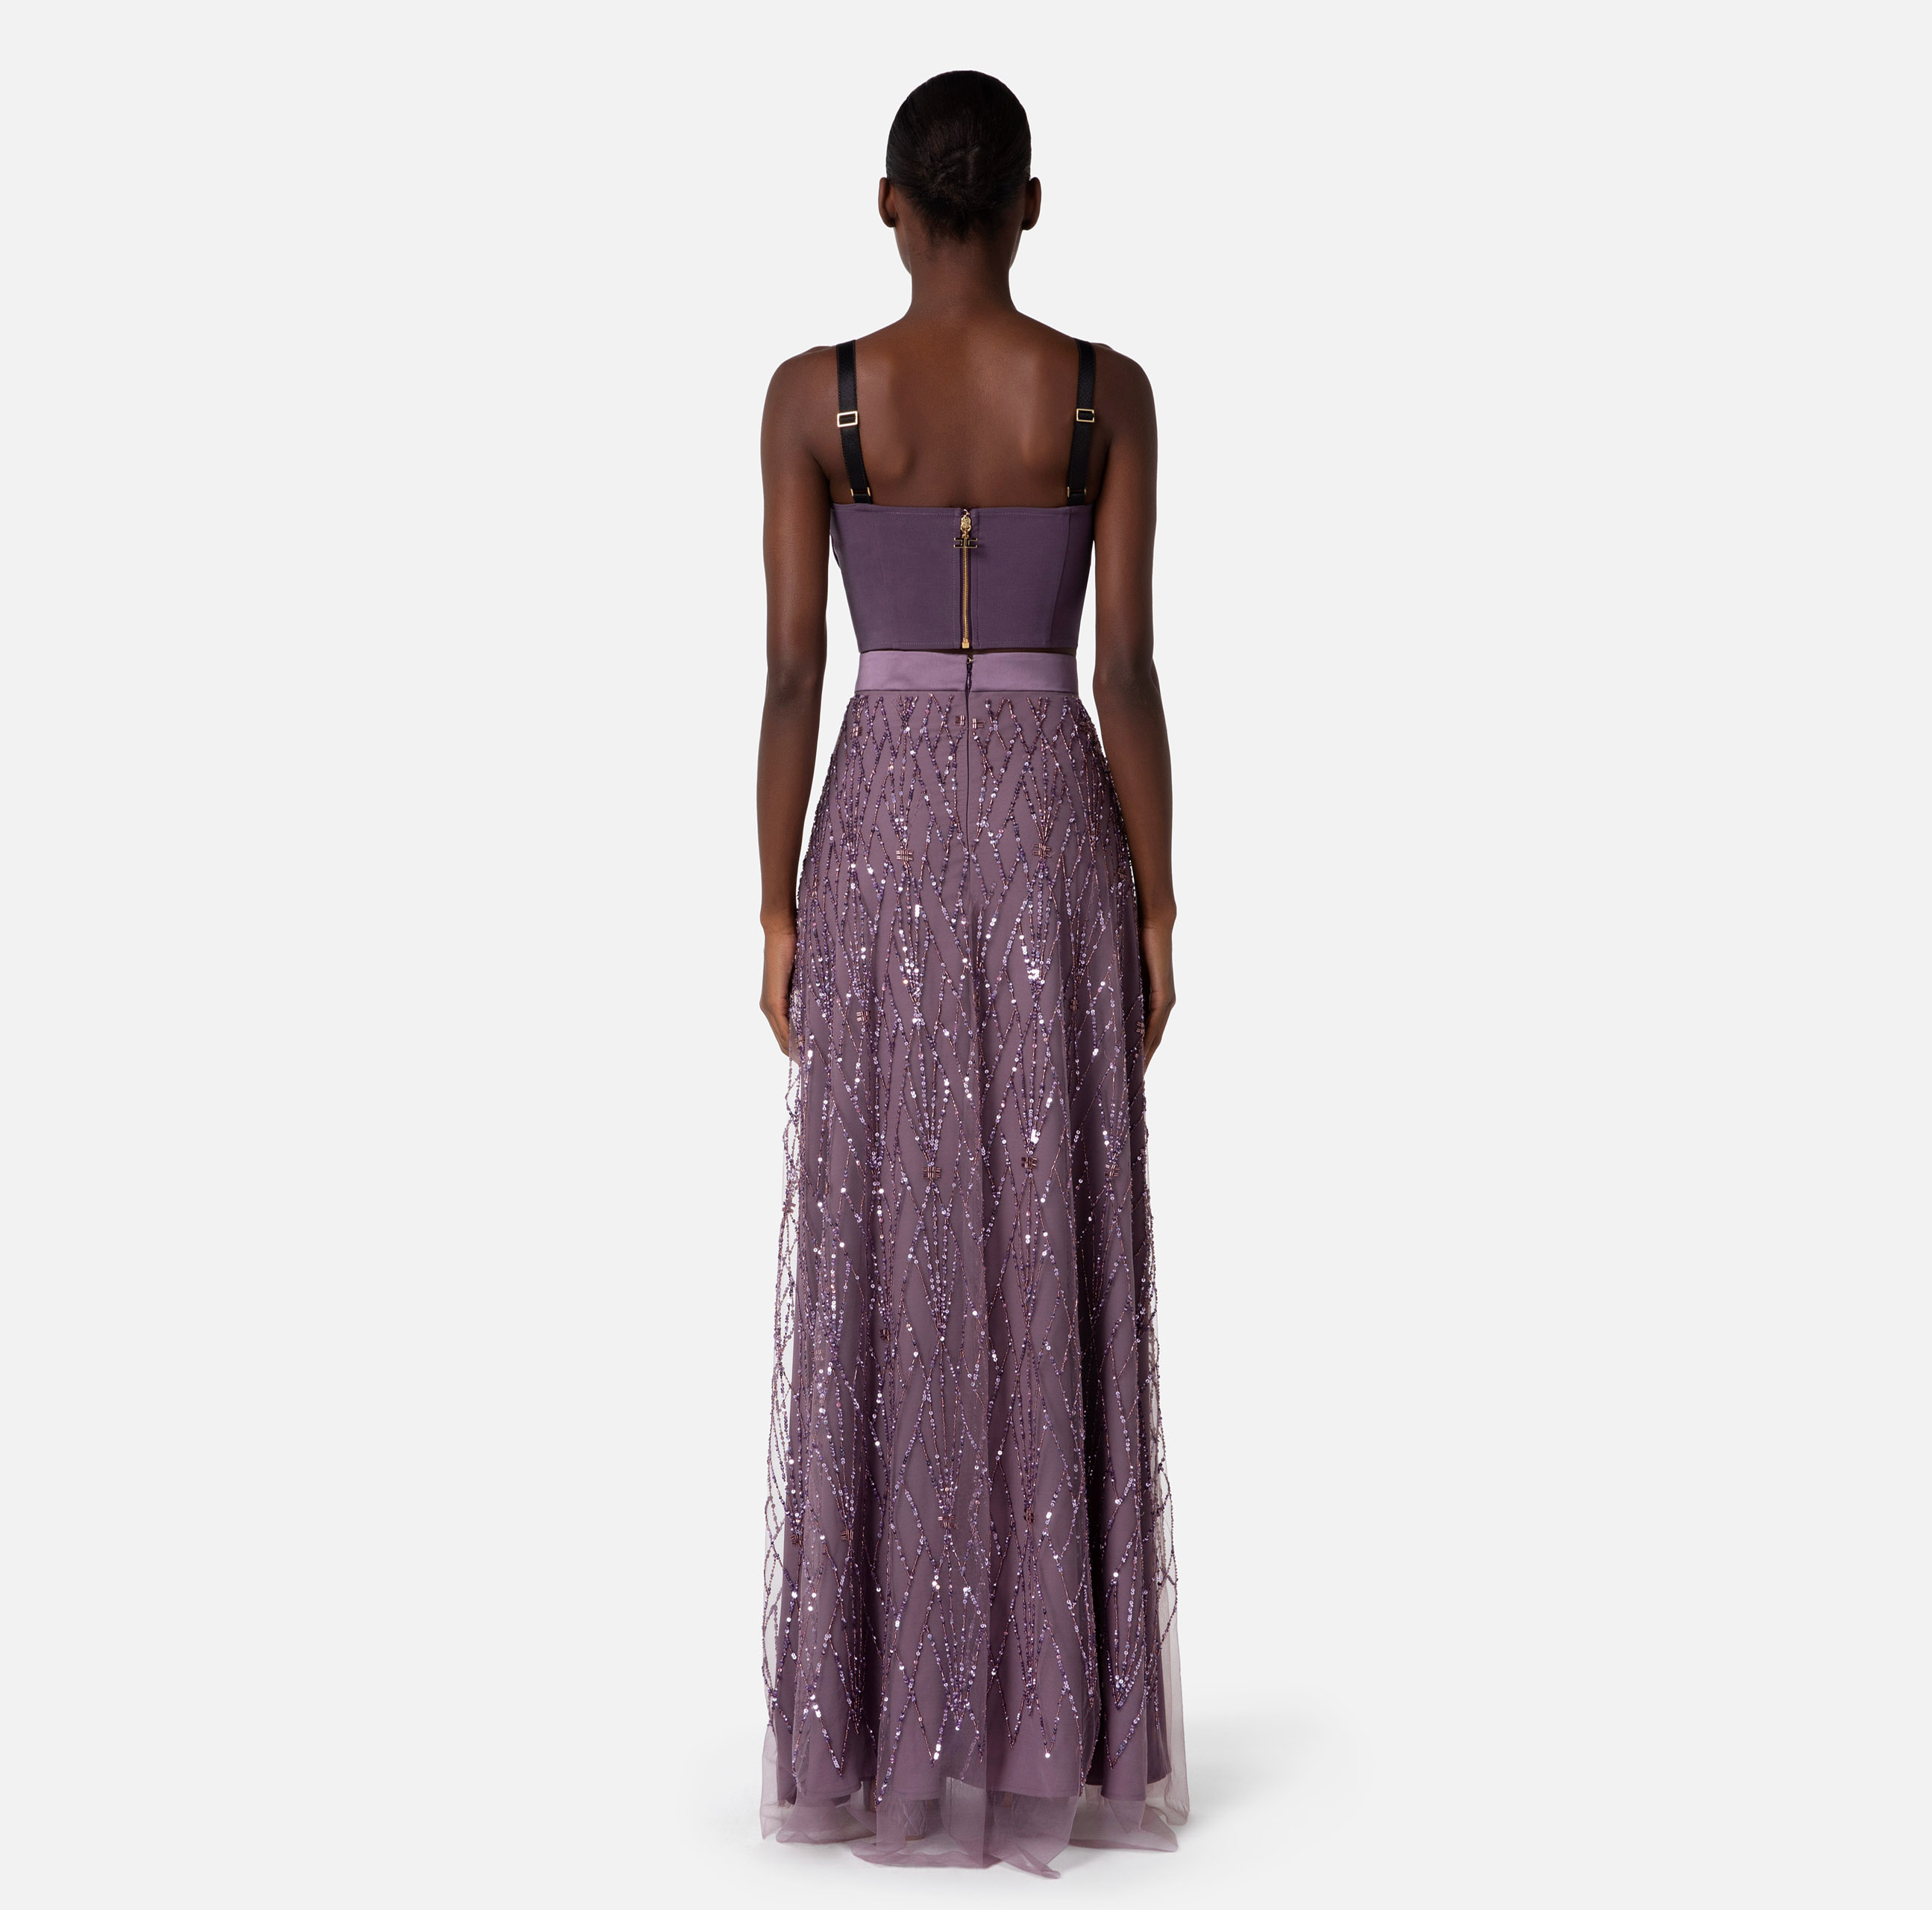 Long skirt in tulle fabric with sequins - Elisabetta Franchi